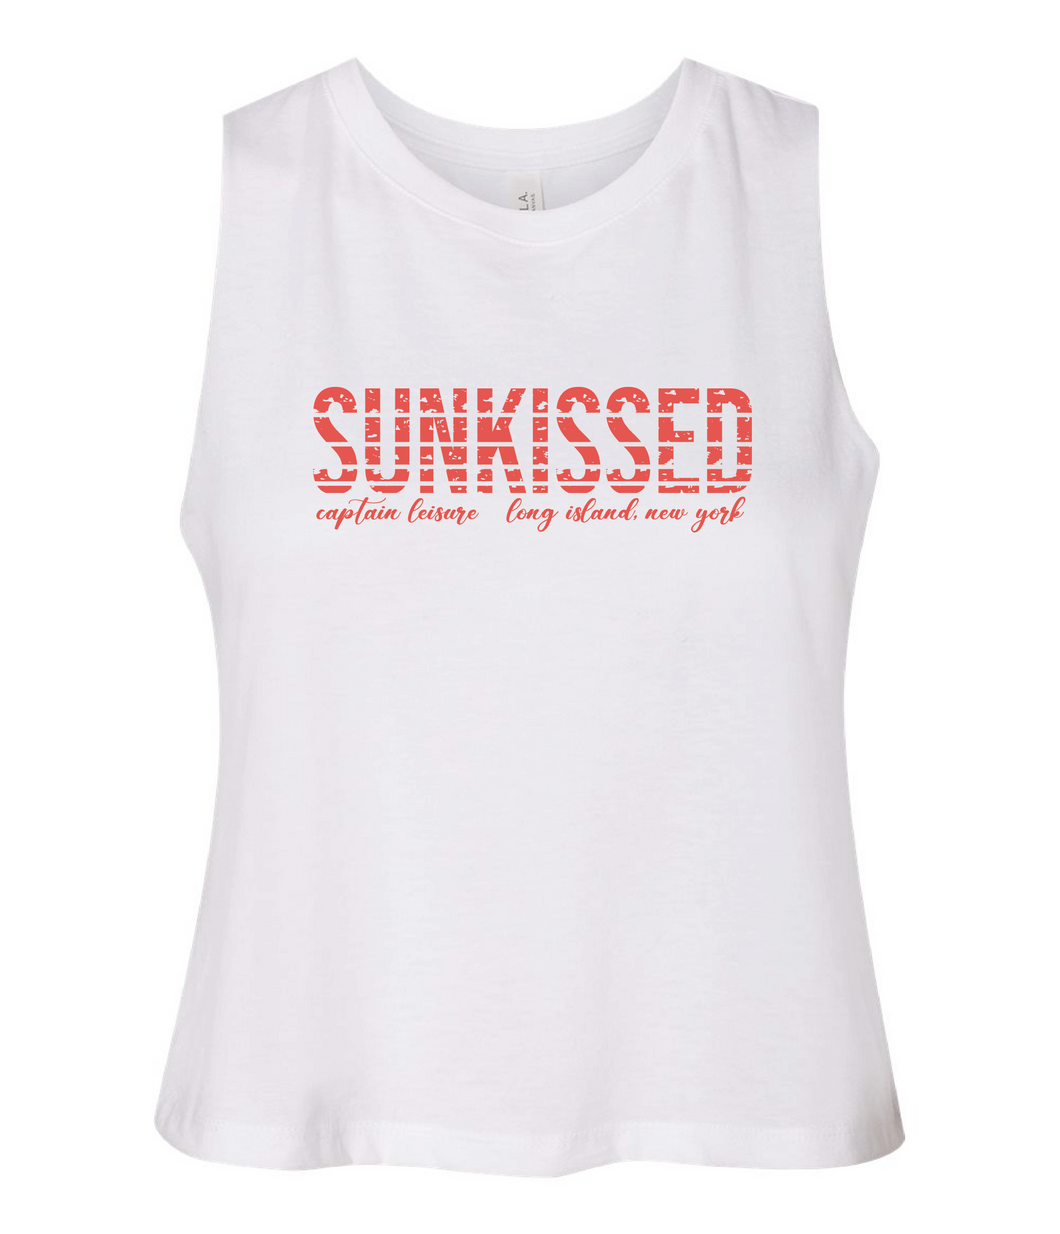 SALE: Sunkissed Cropped Racerback Tank - White